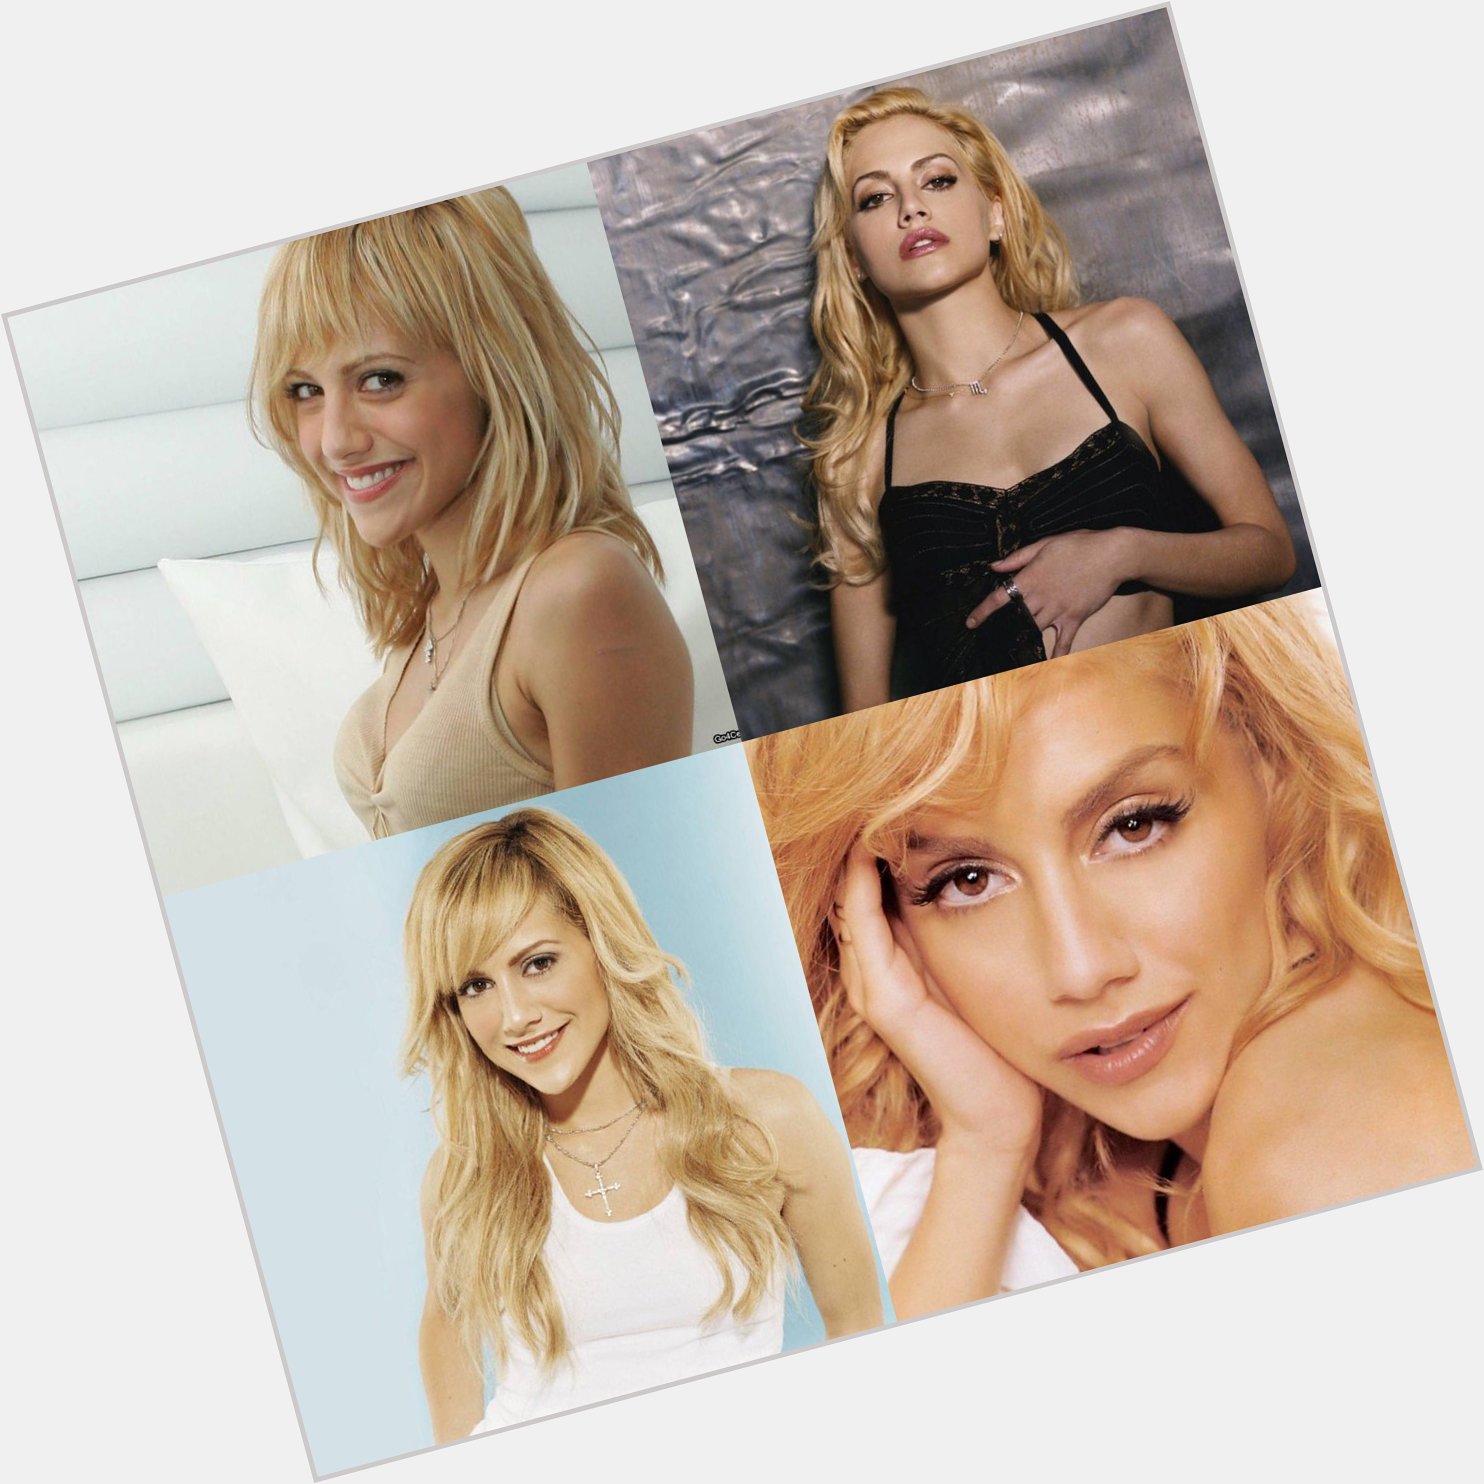 Happy 41 birthday to Brittany Murphy up in heaven. May she Rest In Peace.  